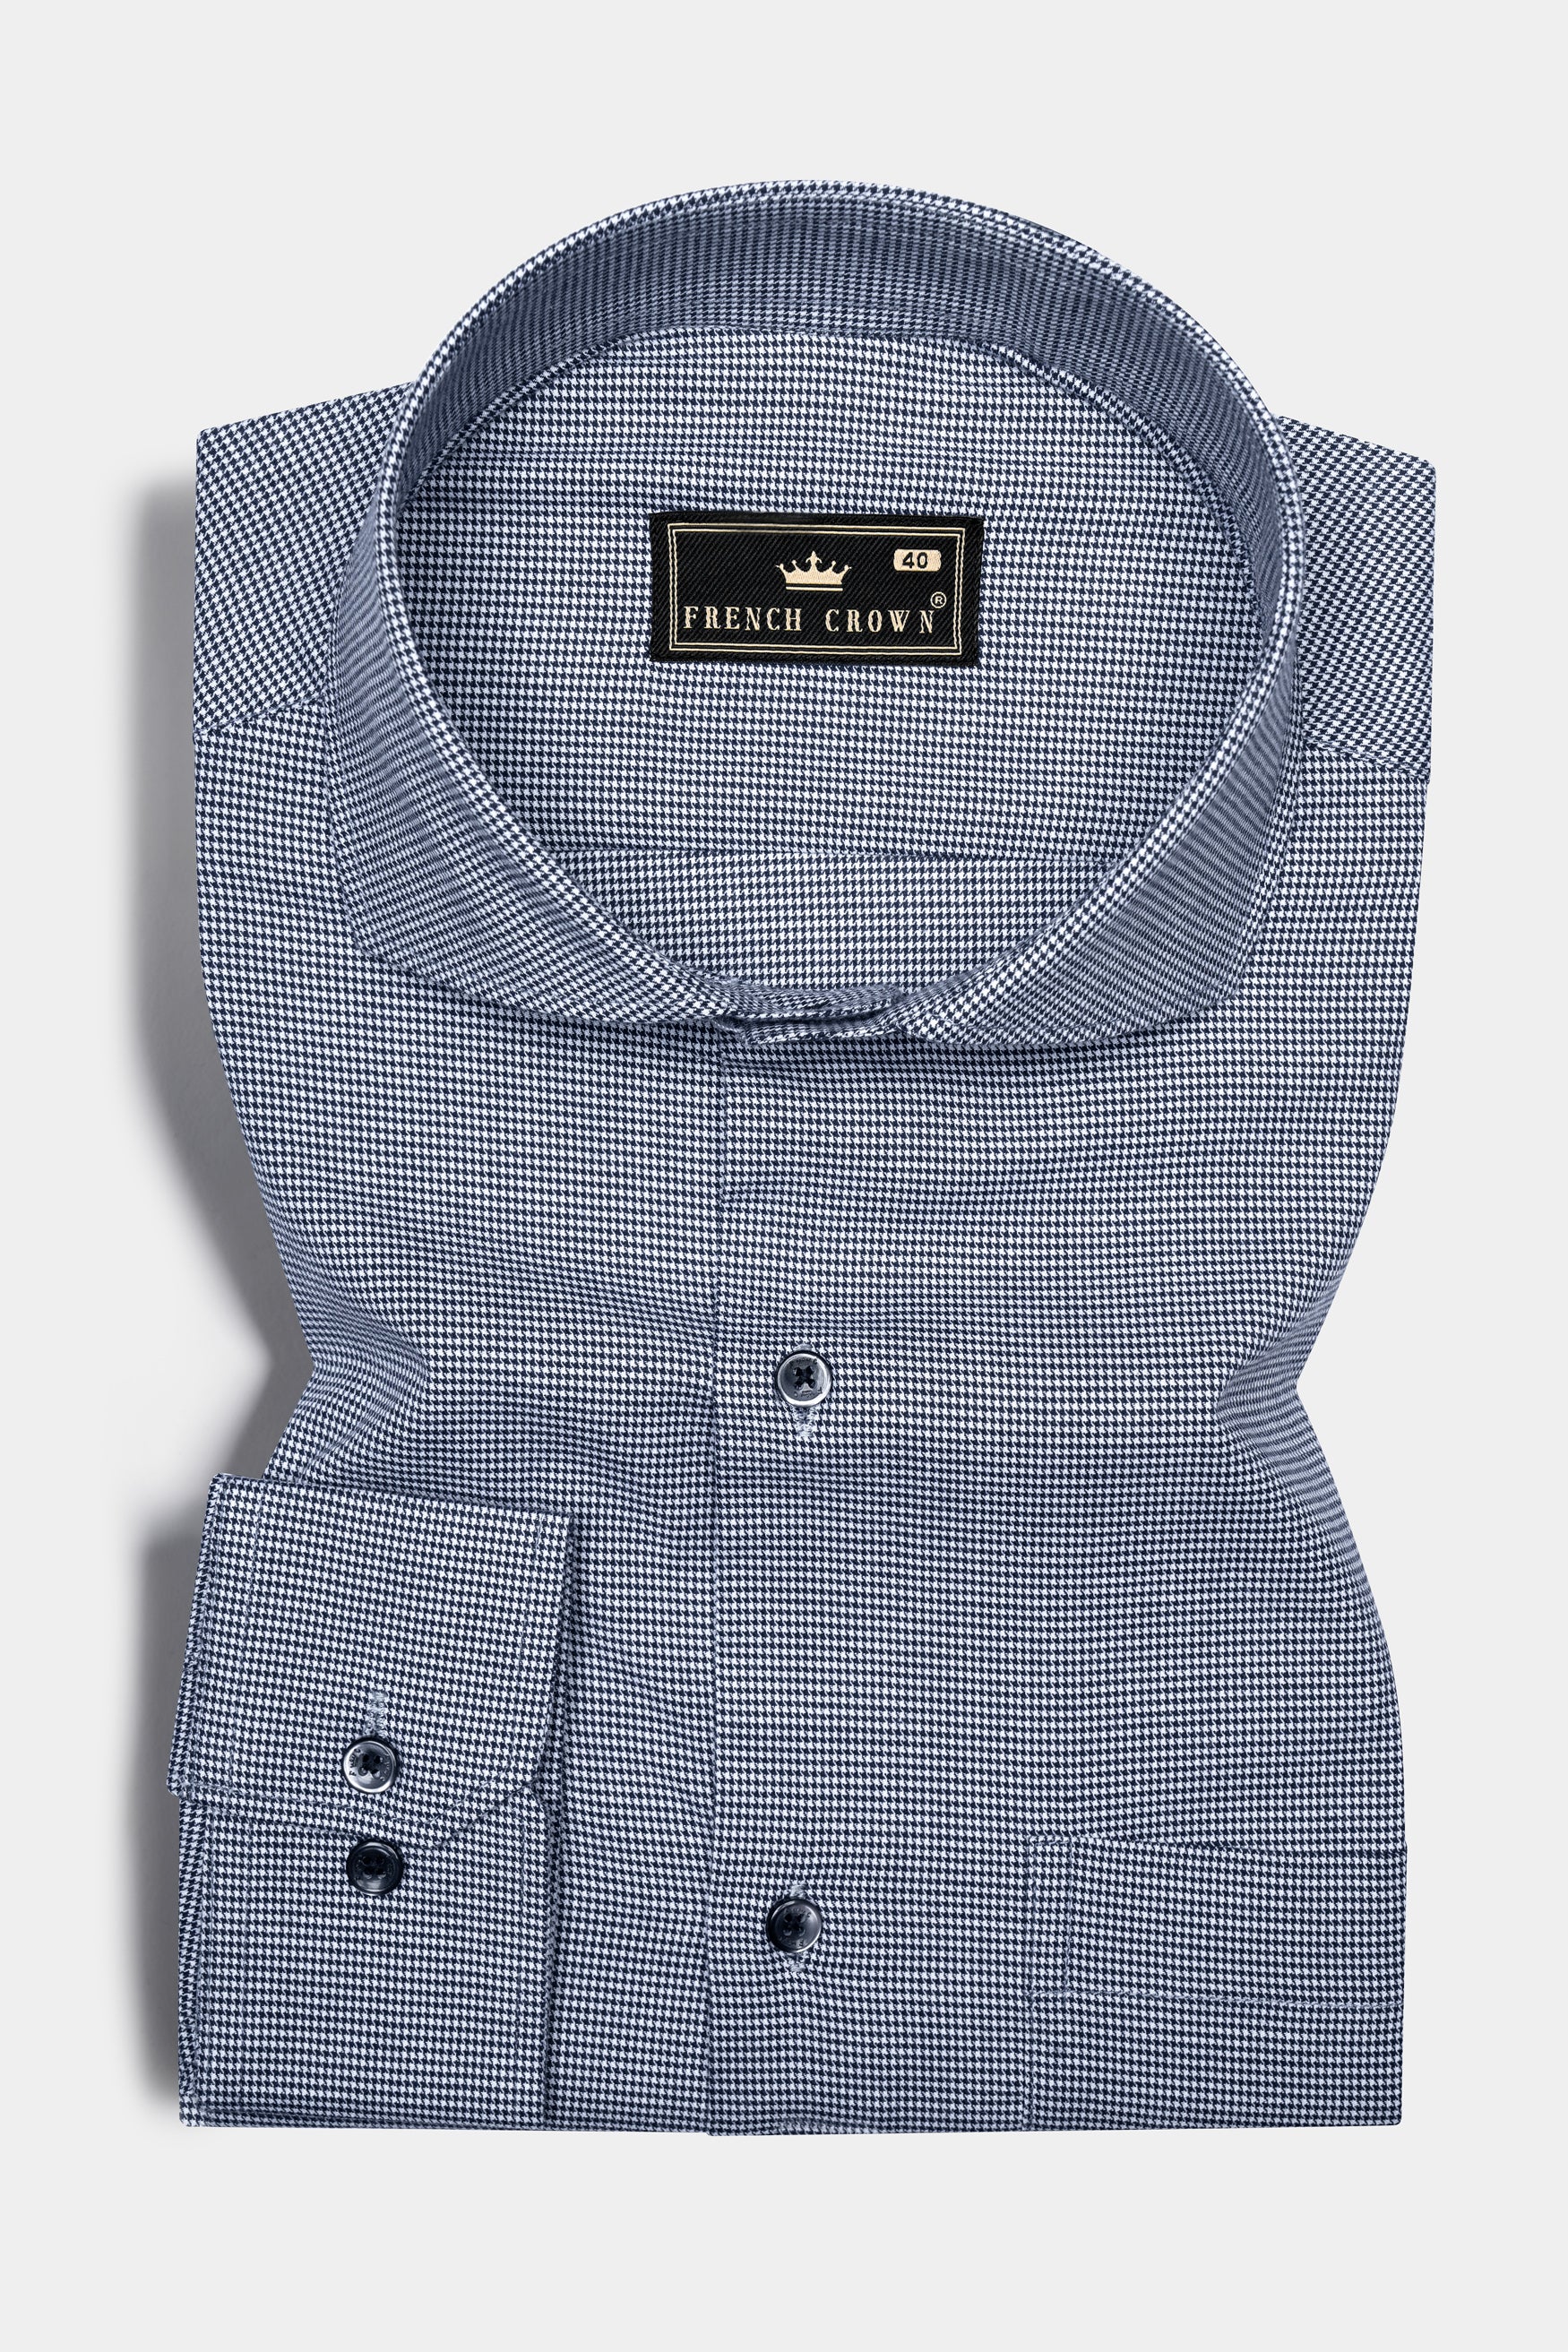 Mirage Blue with White Micro Houndstooth Shirt